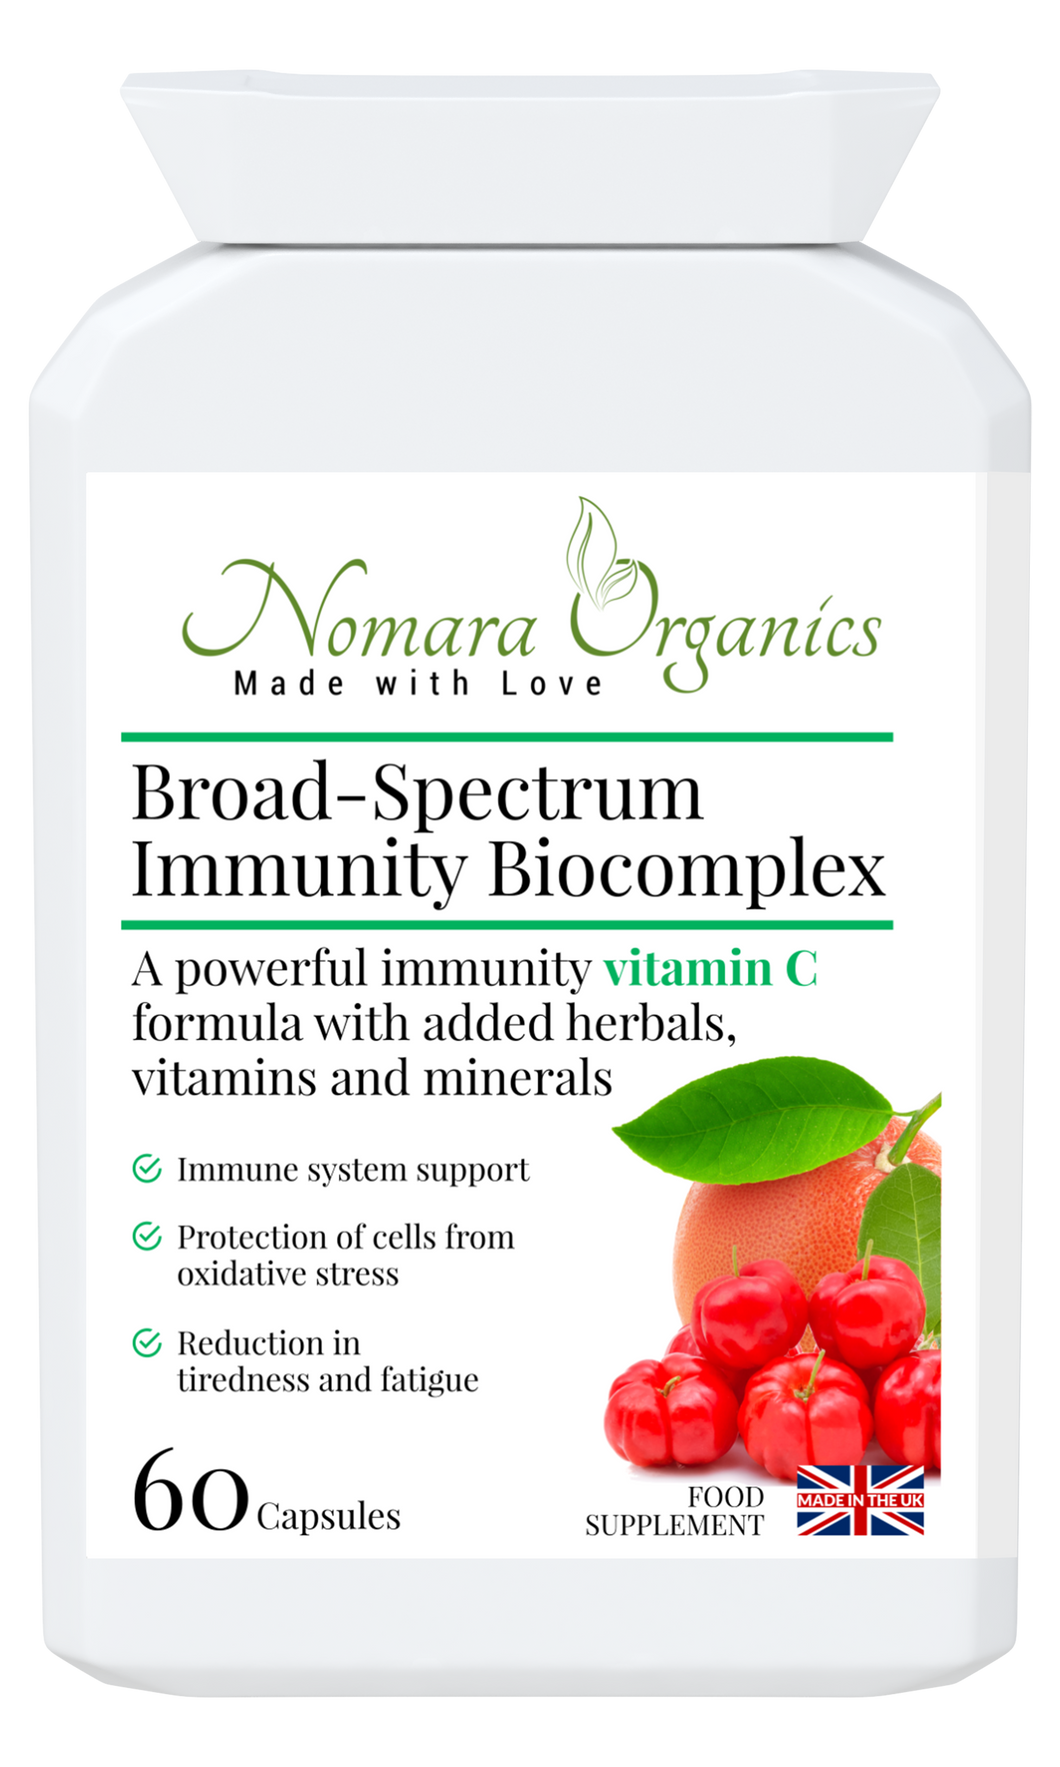 Broad-Spectrum Immunity Biocomplex. A Potent Formula of Vitamin C, Vitamins and Minerals for strong immunity, energy and protection against infections.